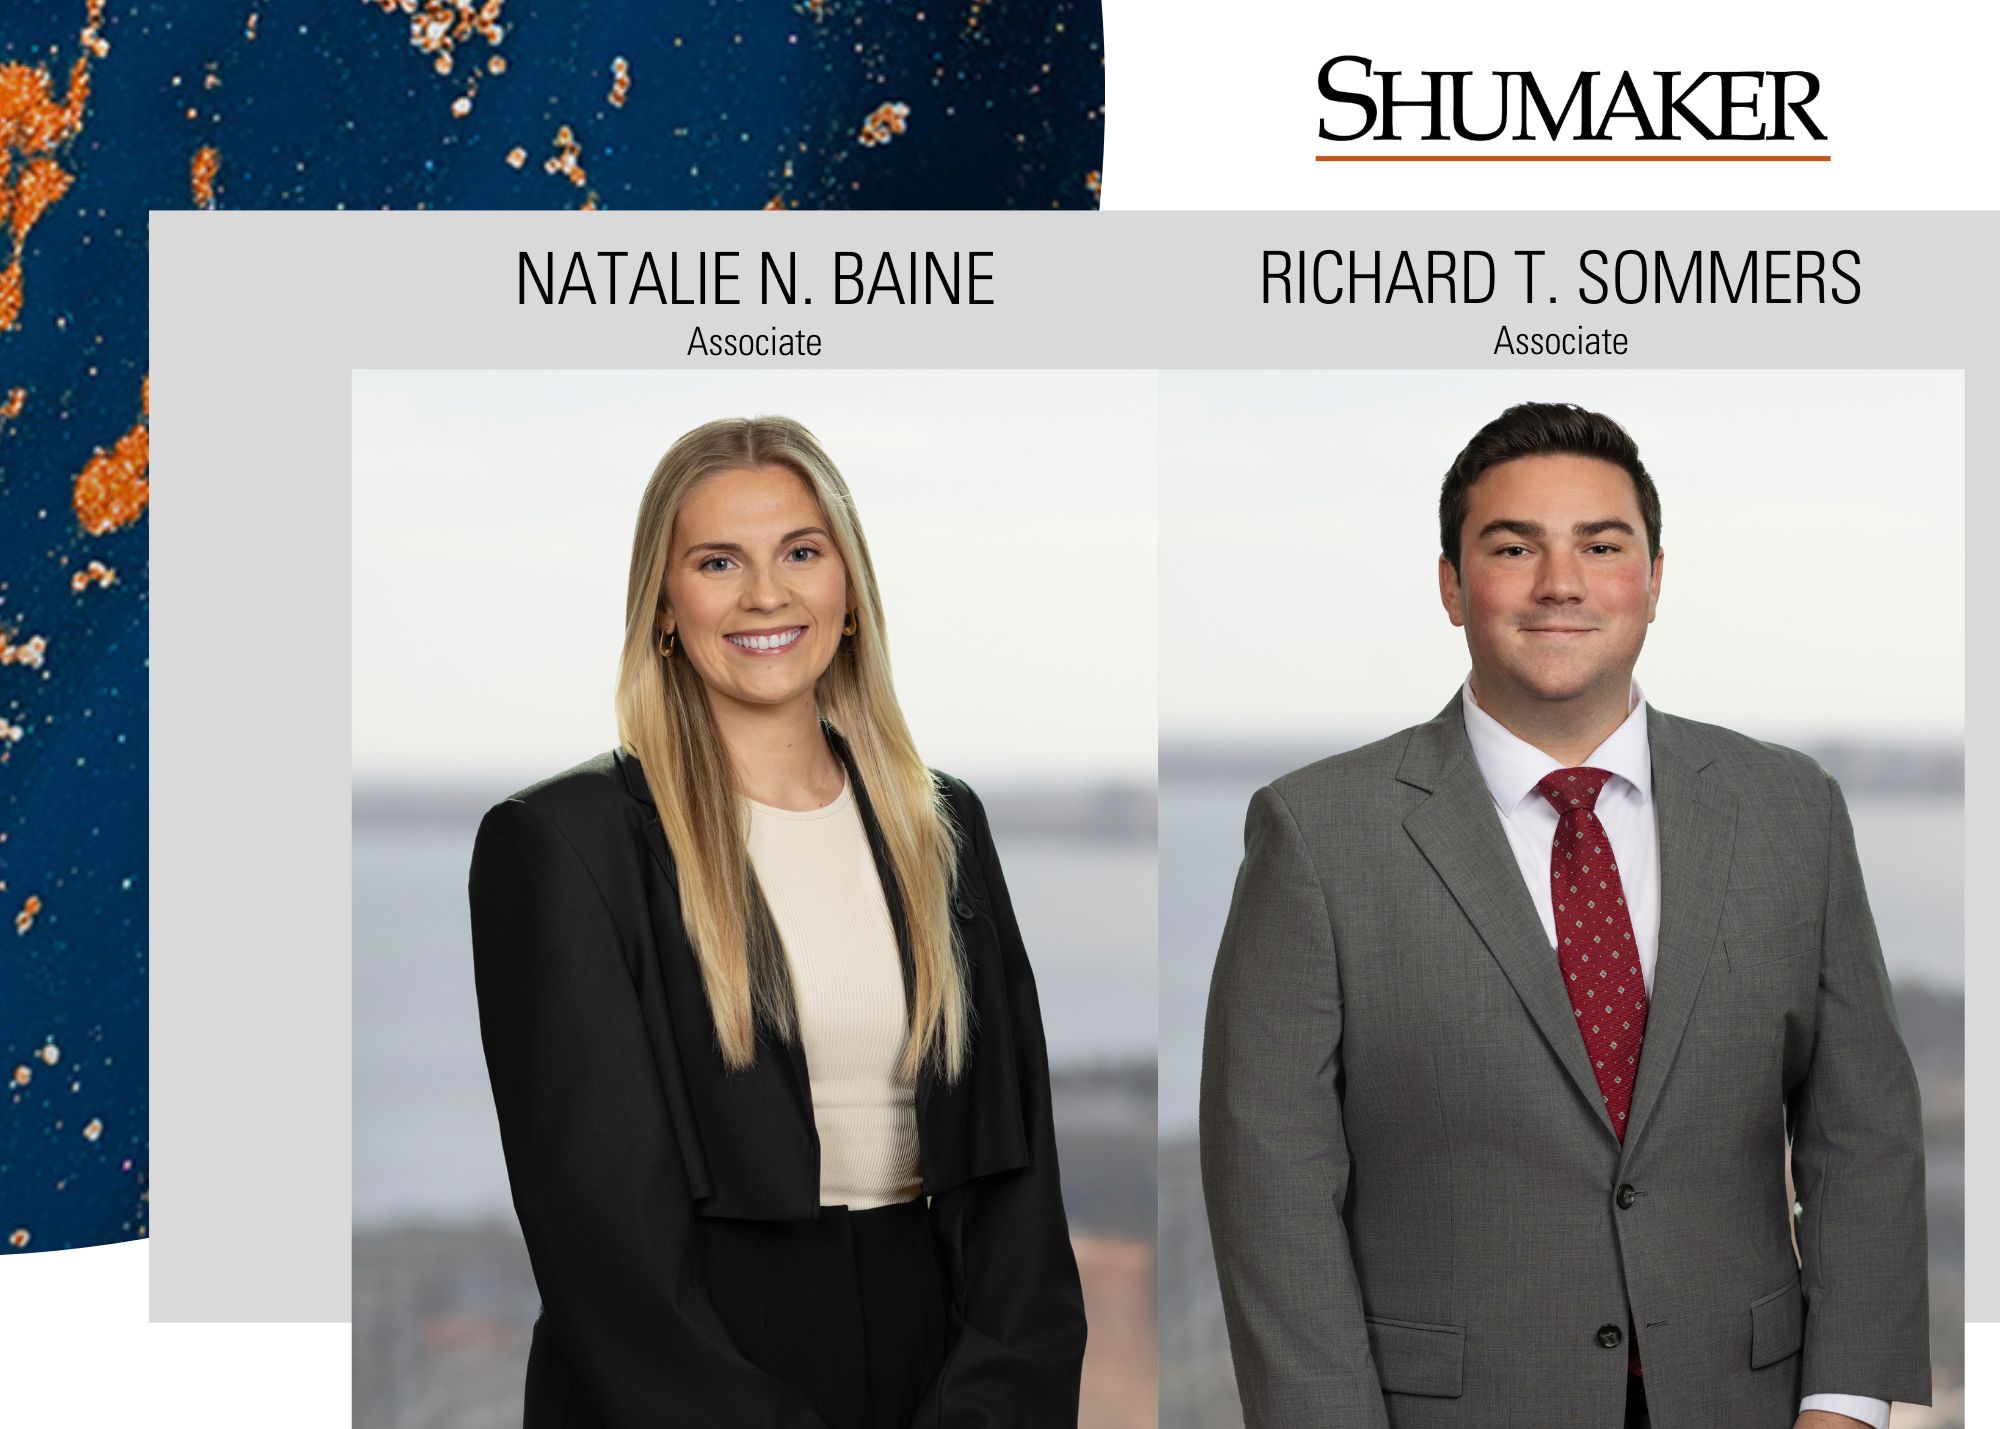 Shumaker Boosts Community Associations Law Group in Response to Projected Growth in U.S. Condominium and Homeowners Associations